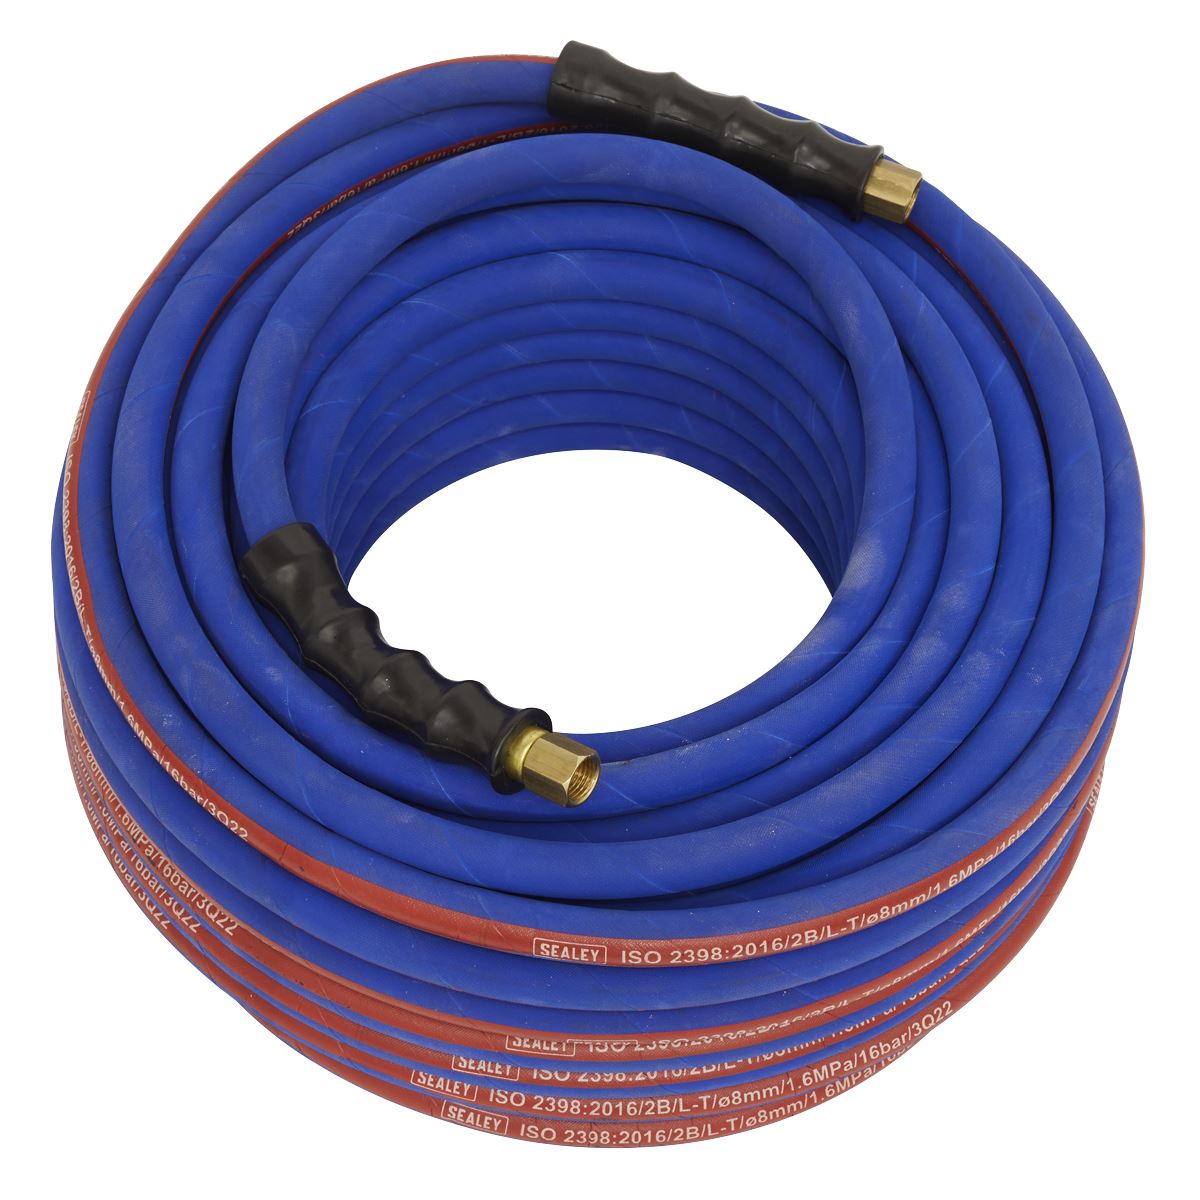 Sealey Air Hose 30m x Ø8mm with 1/4"BSP Unions Extra Heavy-Duty